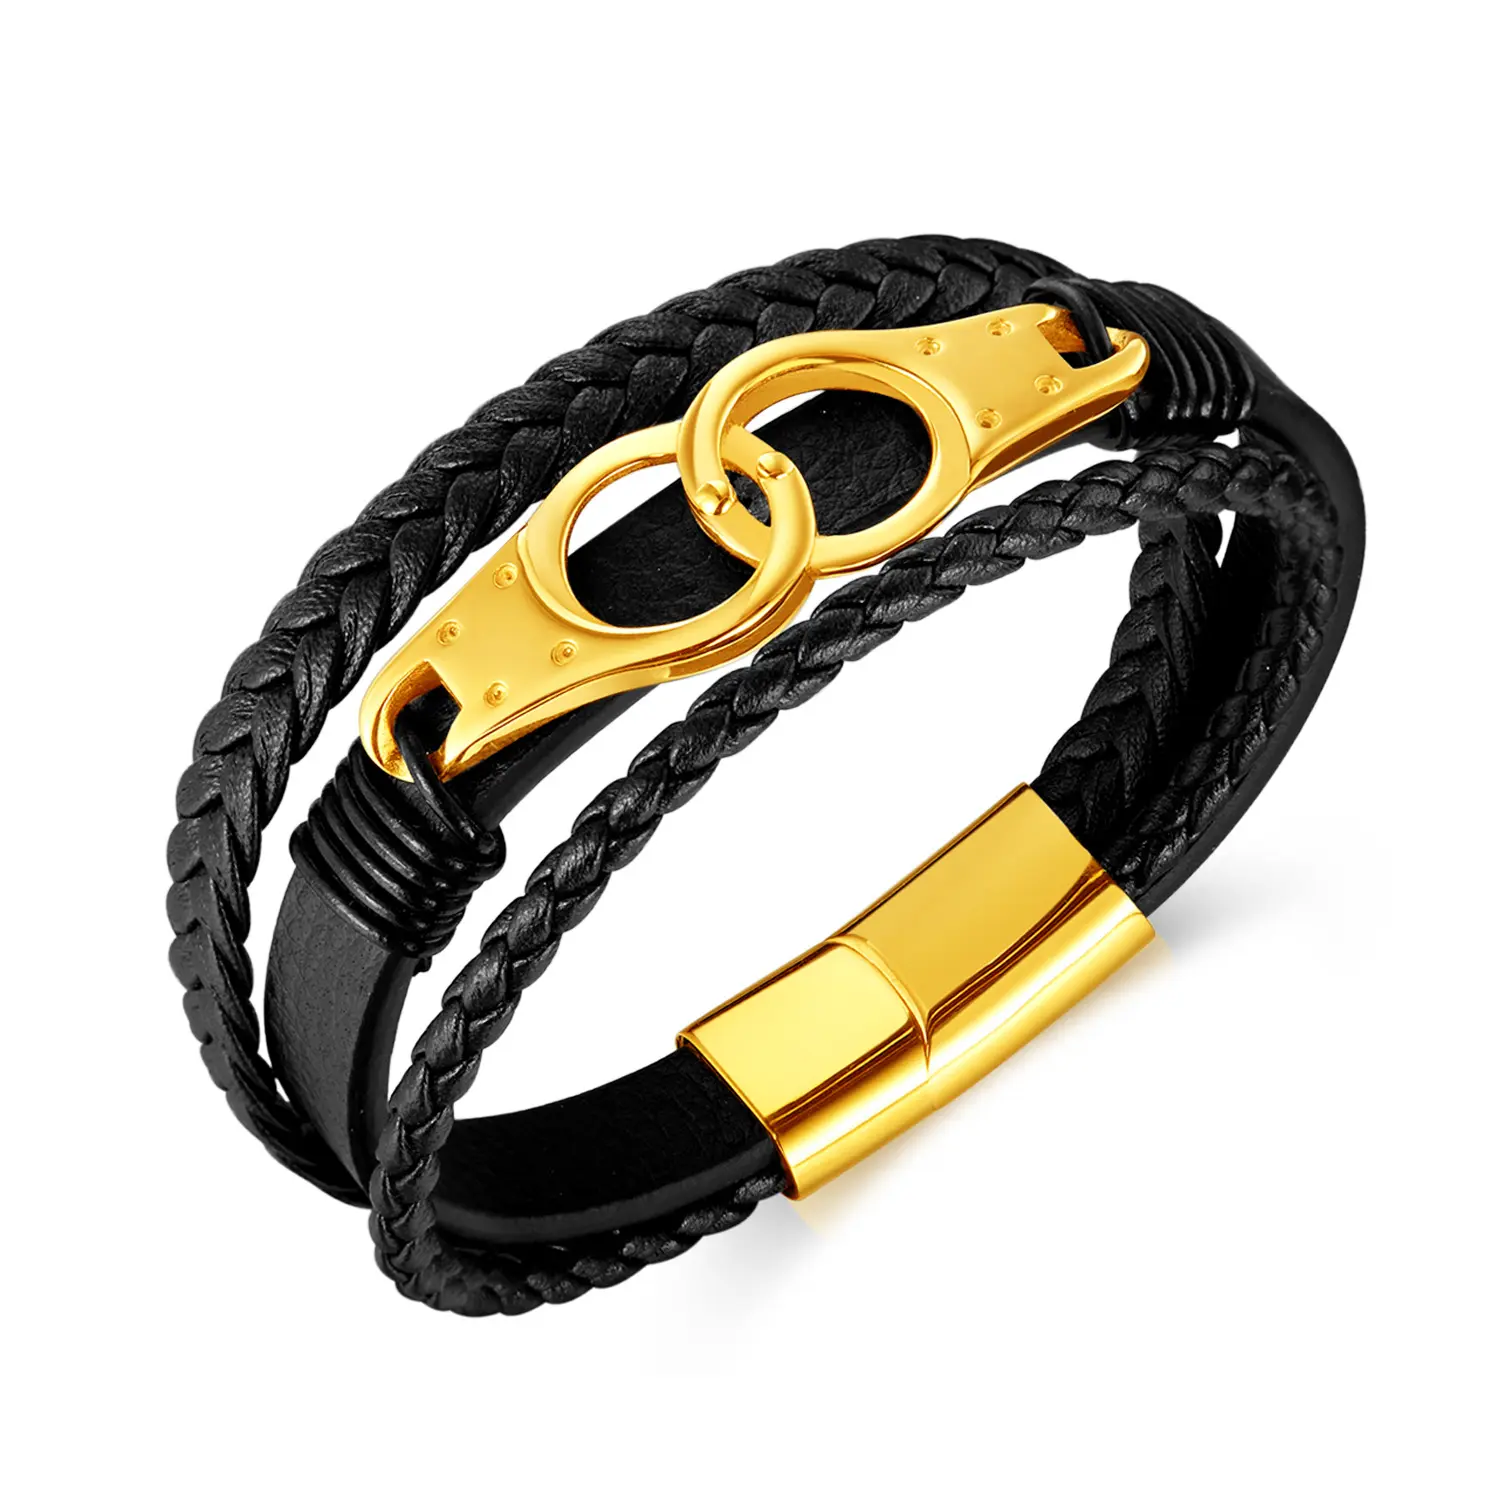 New 3 Layers Black Gold Punk Genuine Leather Bracelet for Male Magnetic Stainless Button Birthday Gift Men Handcuff Bracelet